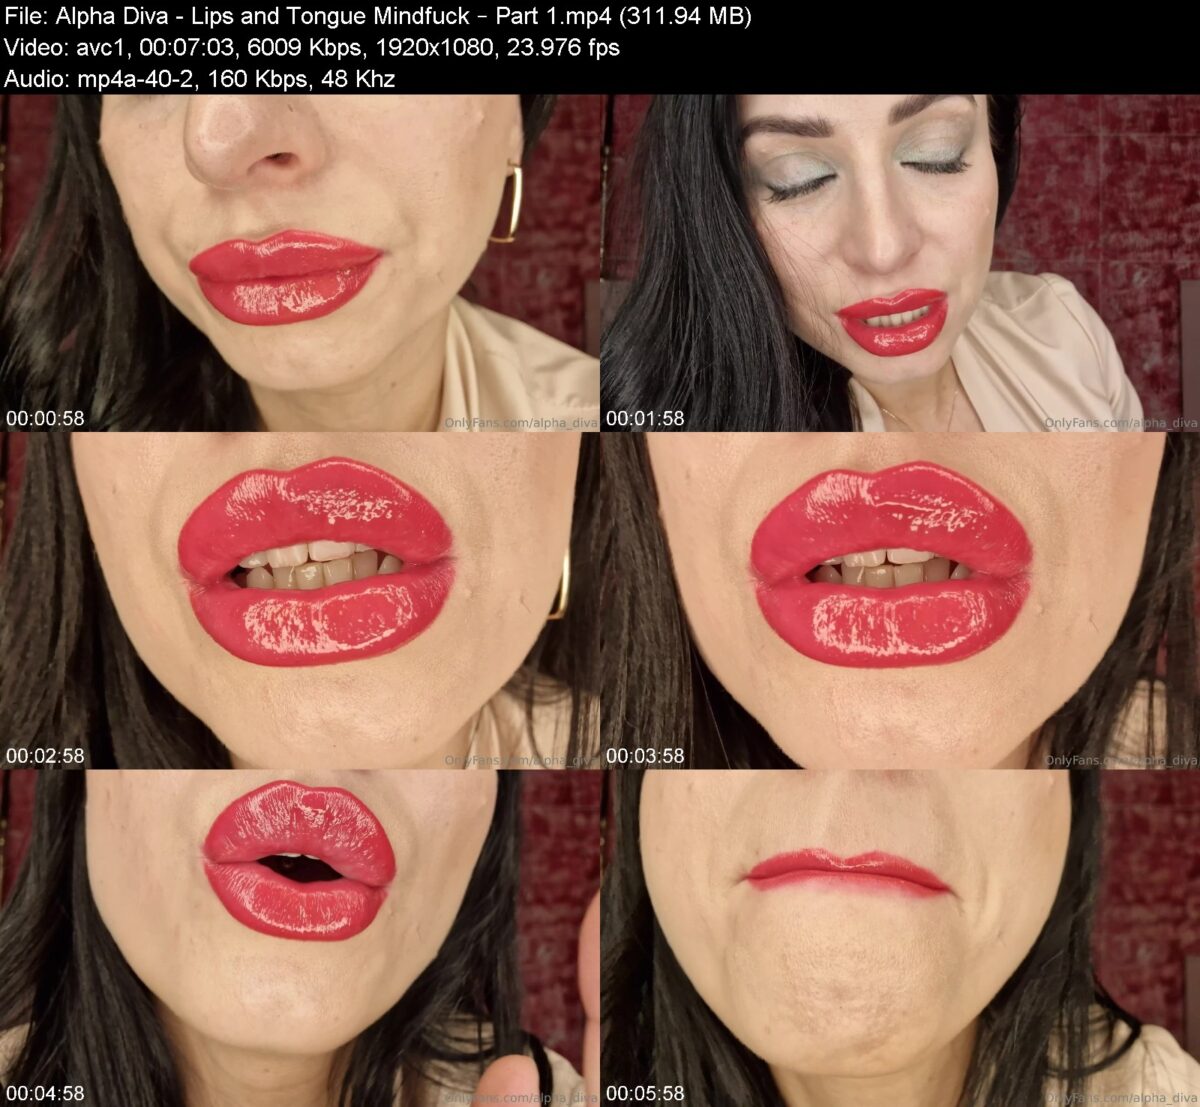 Alpha Diva - Lips and Tongue Mindfuck - Part 1